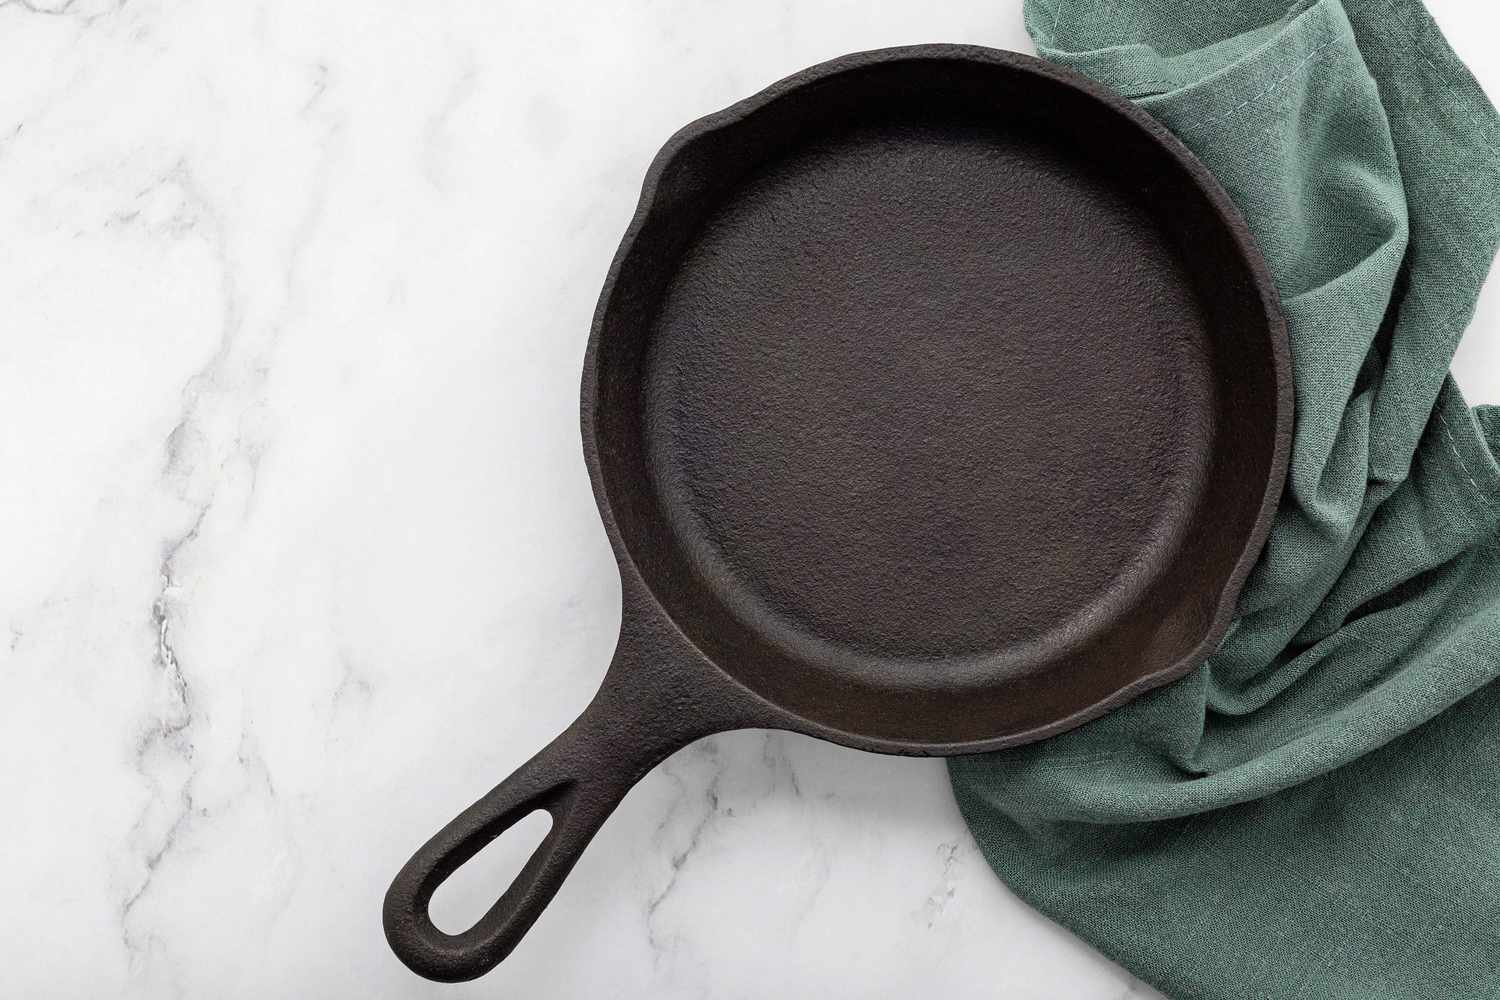 cast iron skillet on marble surface